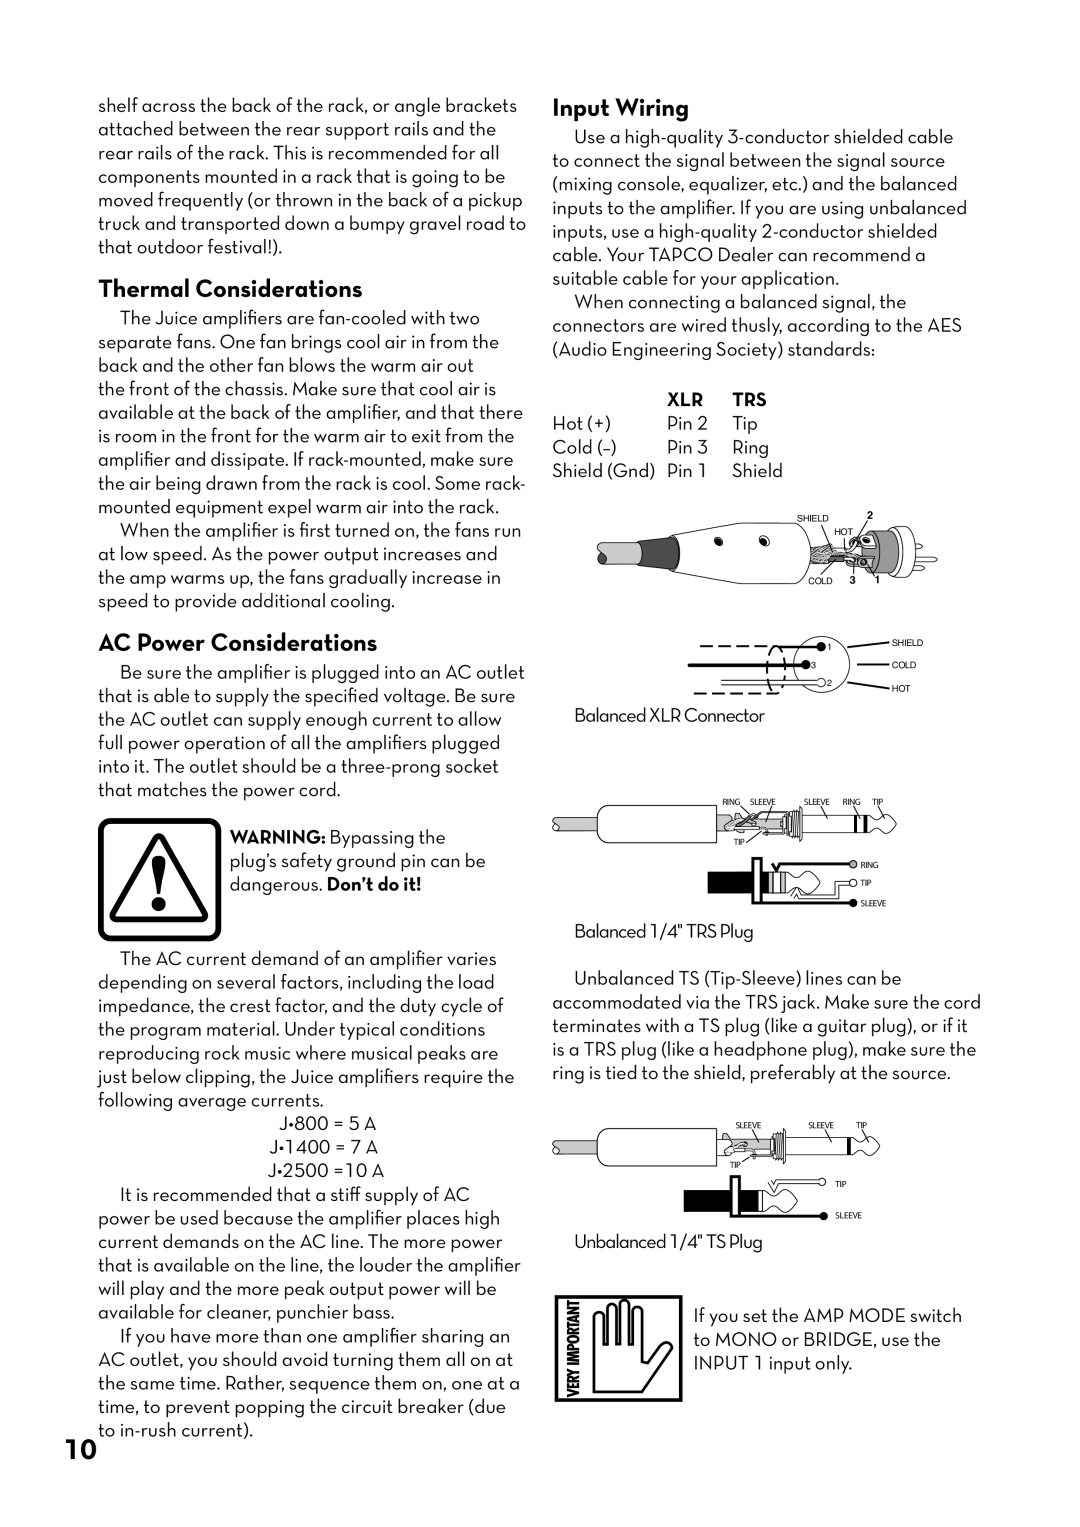 Tapco pmn manual Thermal Considerations, AC Power Considerations, Input Wiring 